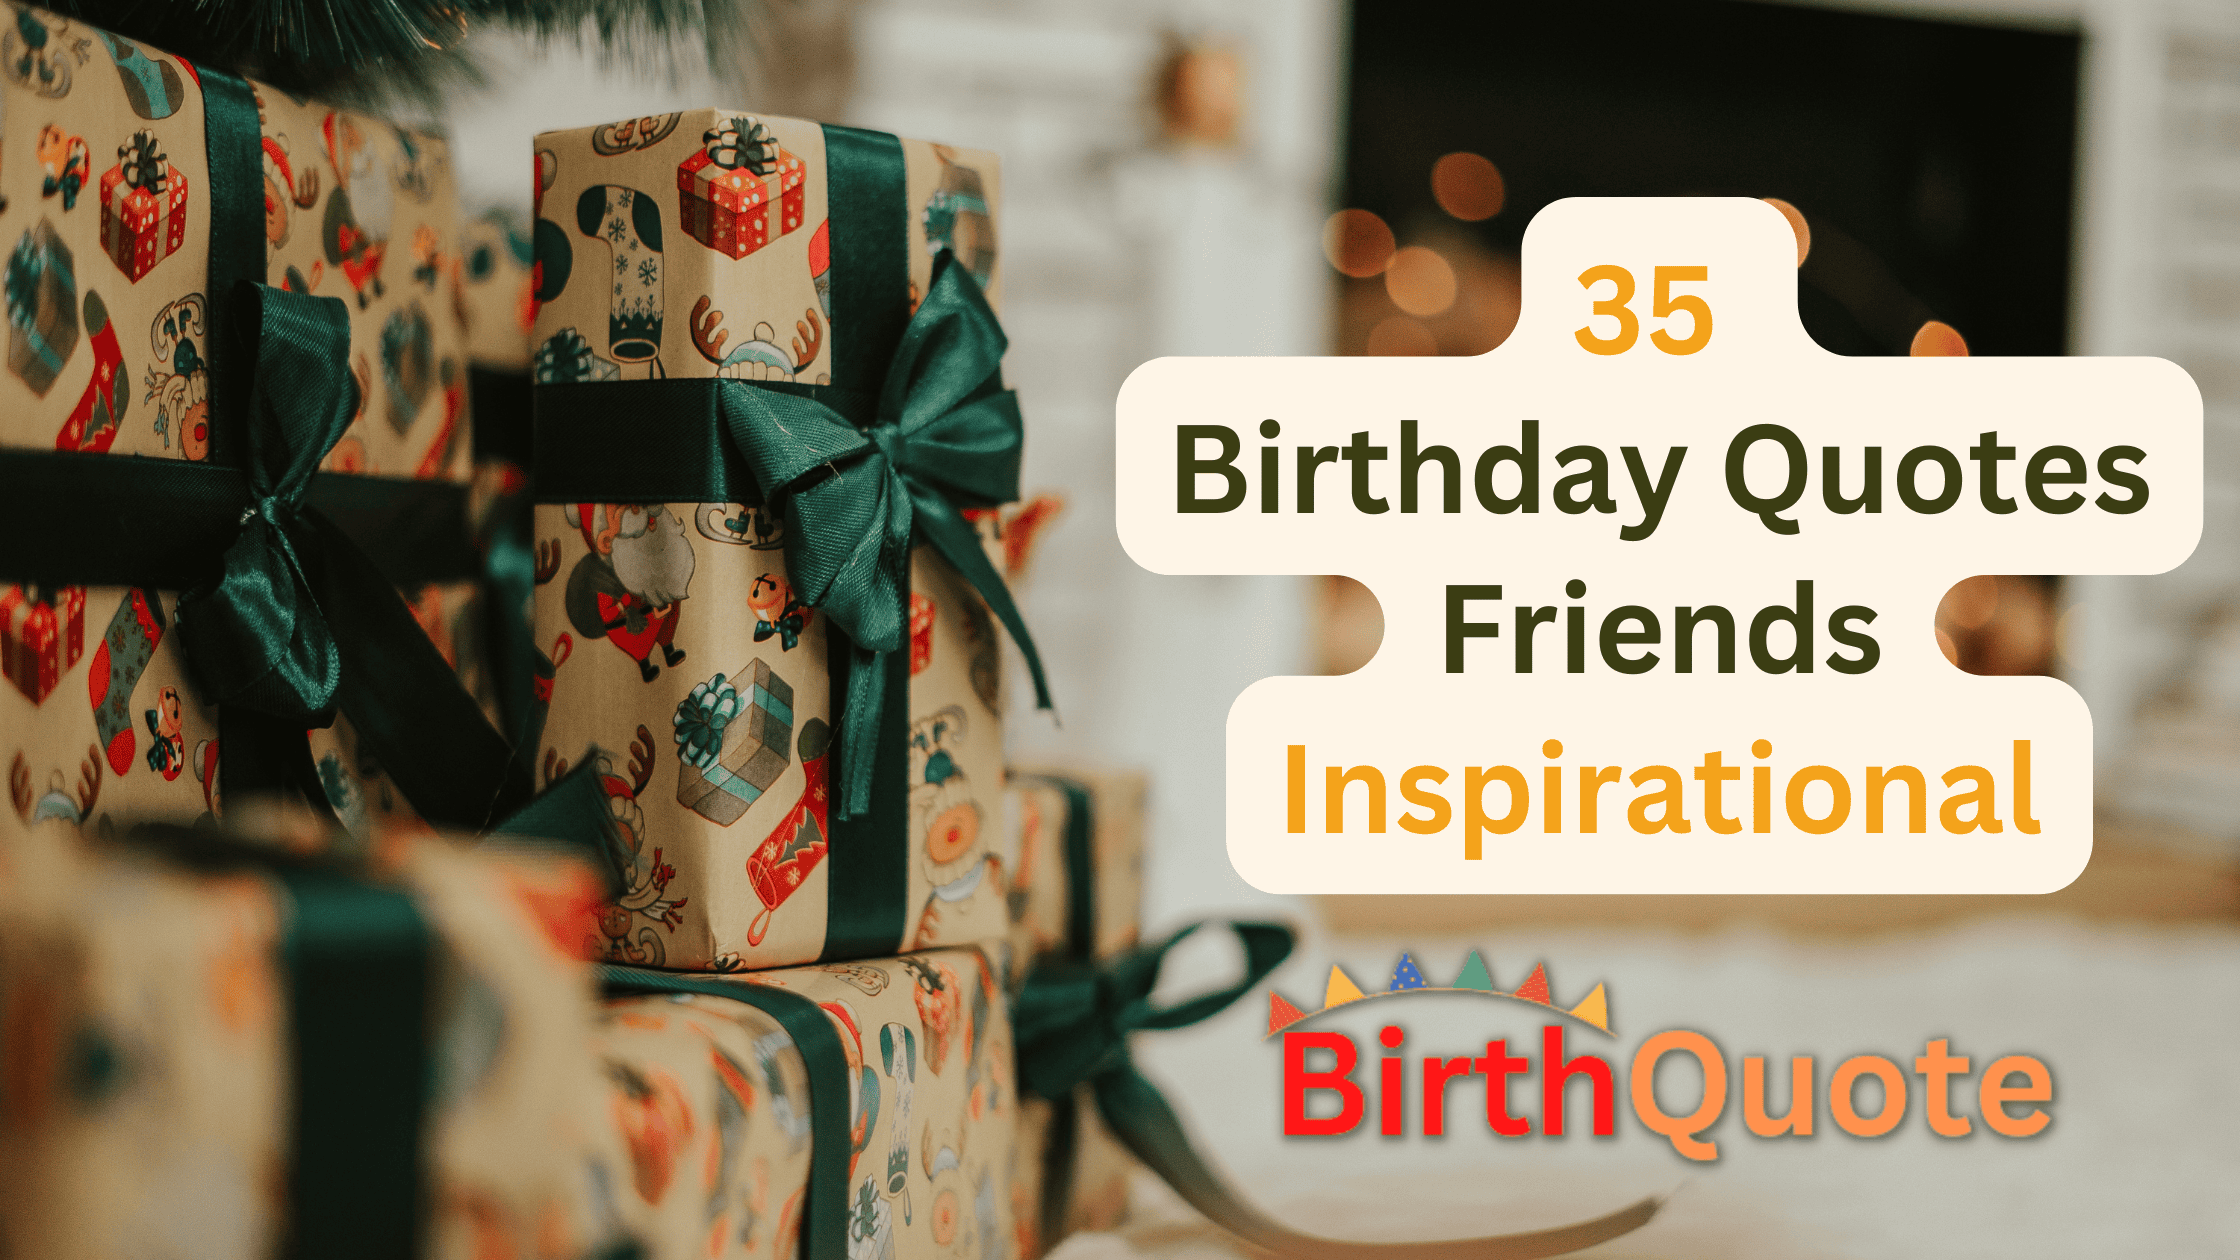 35 Birthday Quotes Friends Inspirational